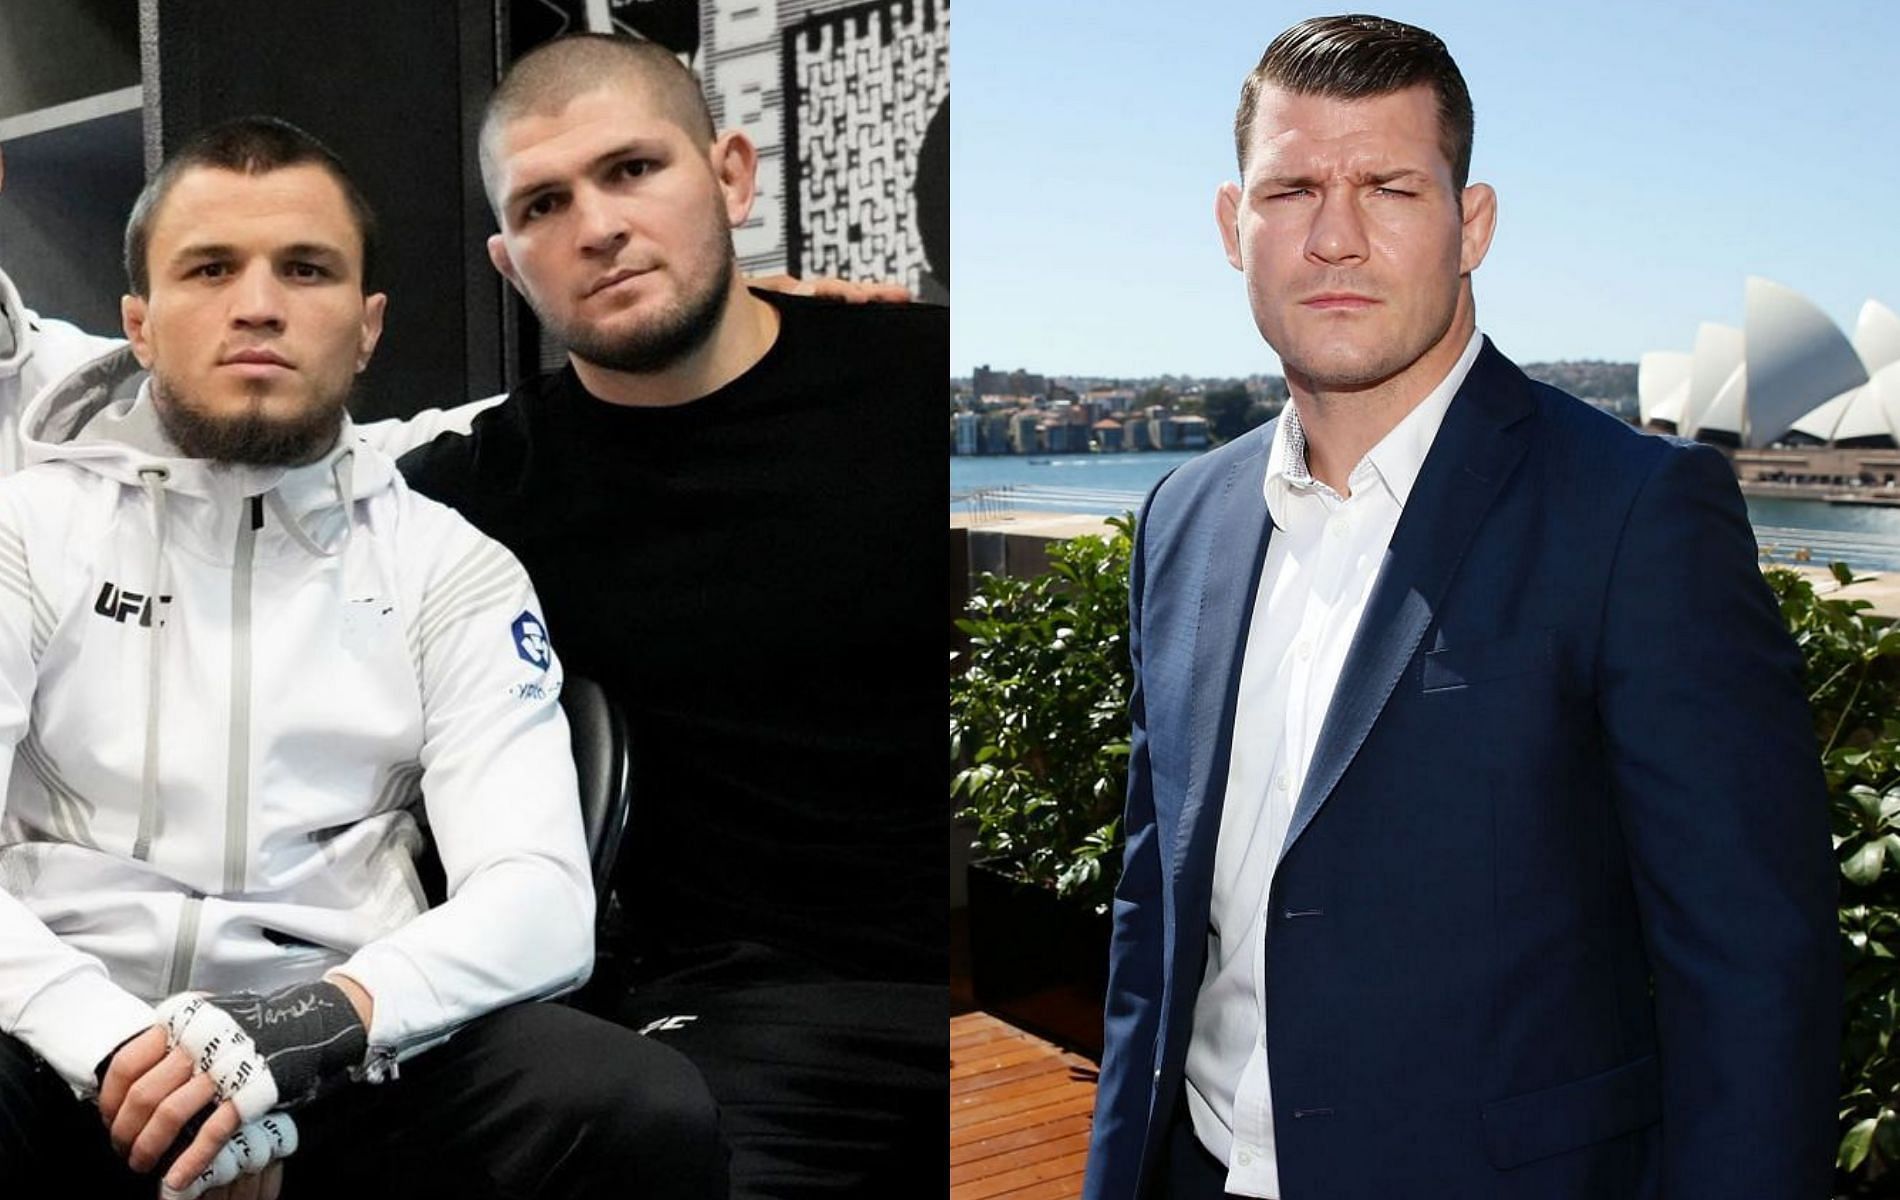 “The new Khabib” – Michael Bisping believes Umar Nurmagomedov is a future title contender